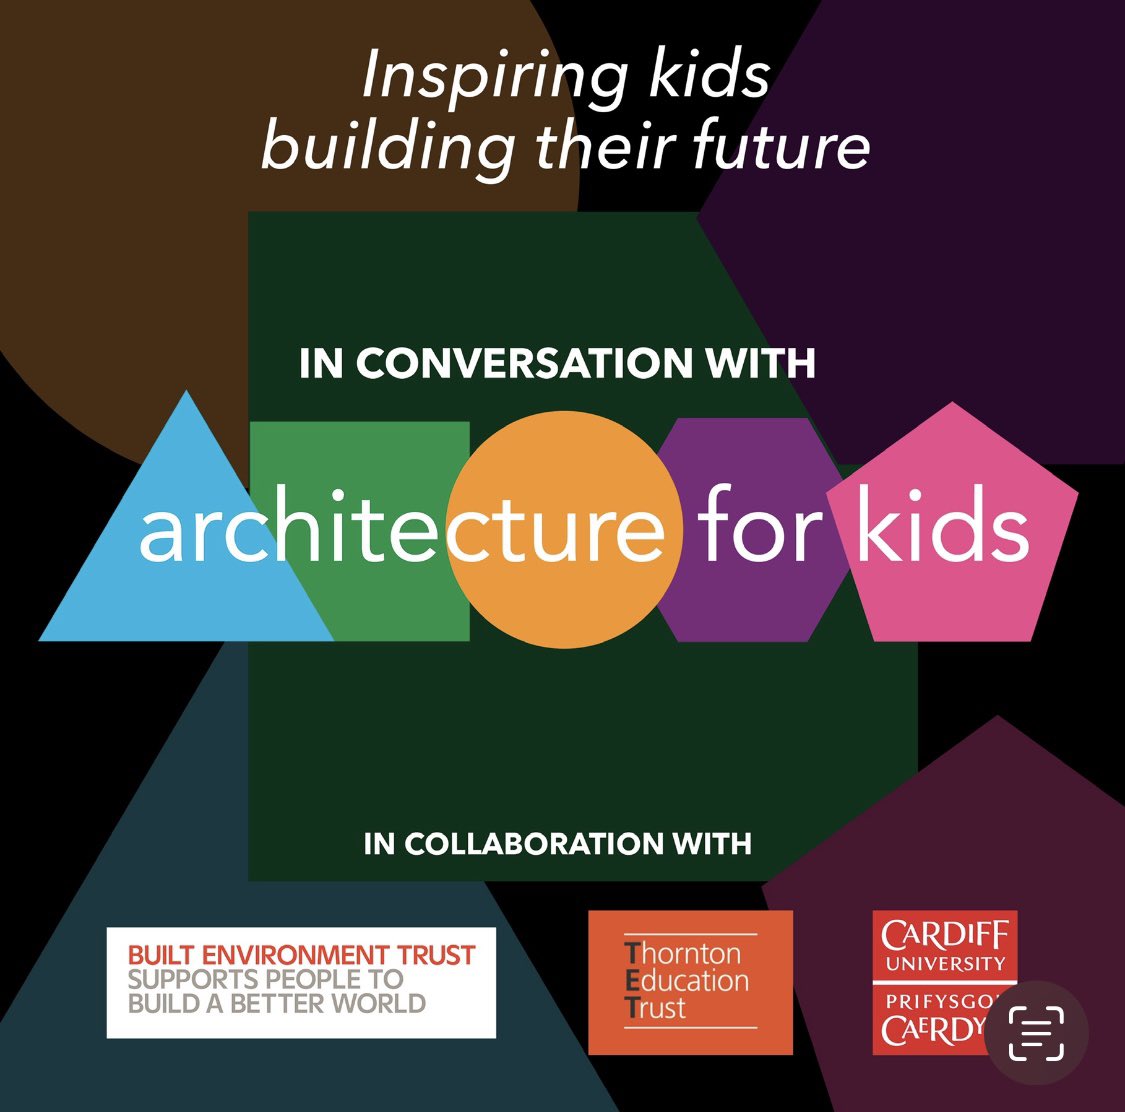 Hot off the press @BDonline article about Architecture for kids podcast series: bdonline.co.uk/opinion/how-th…